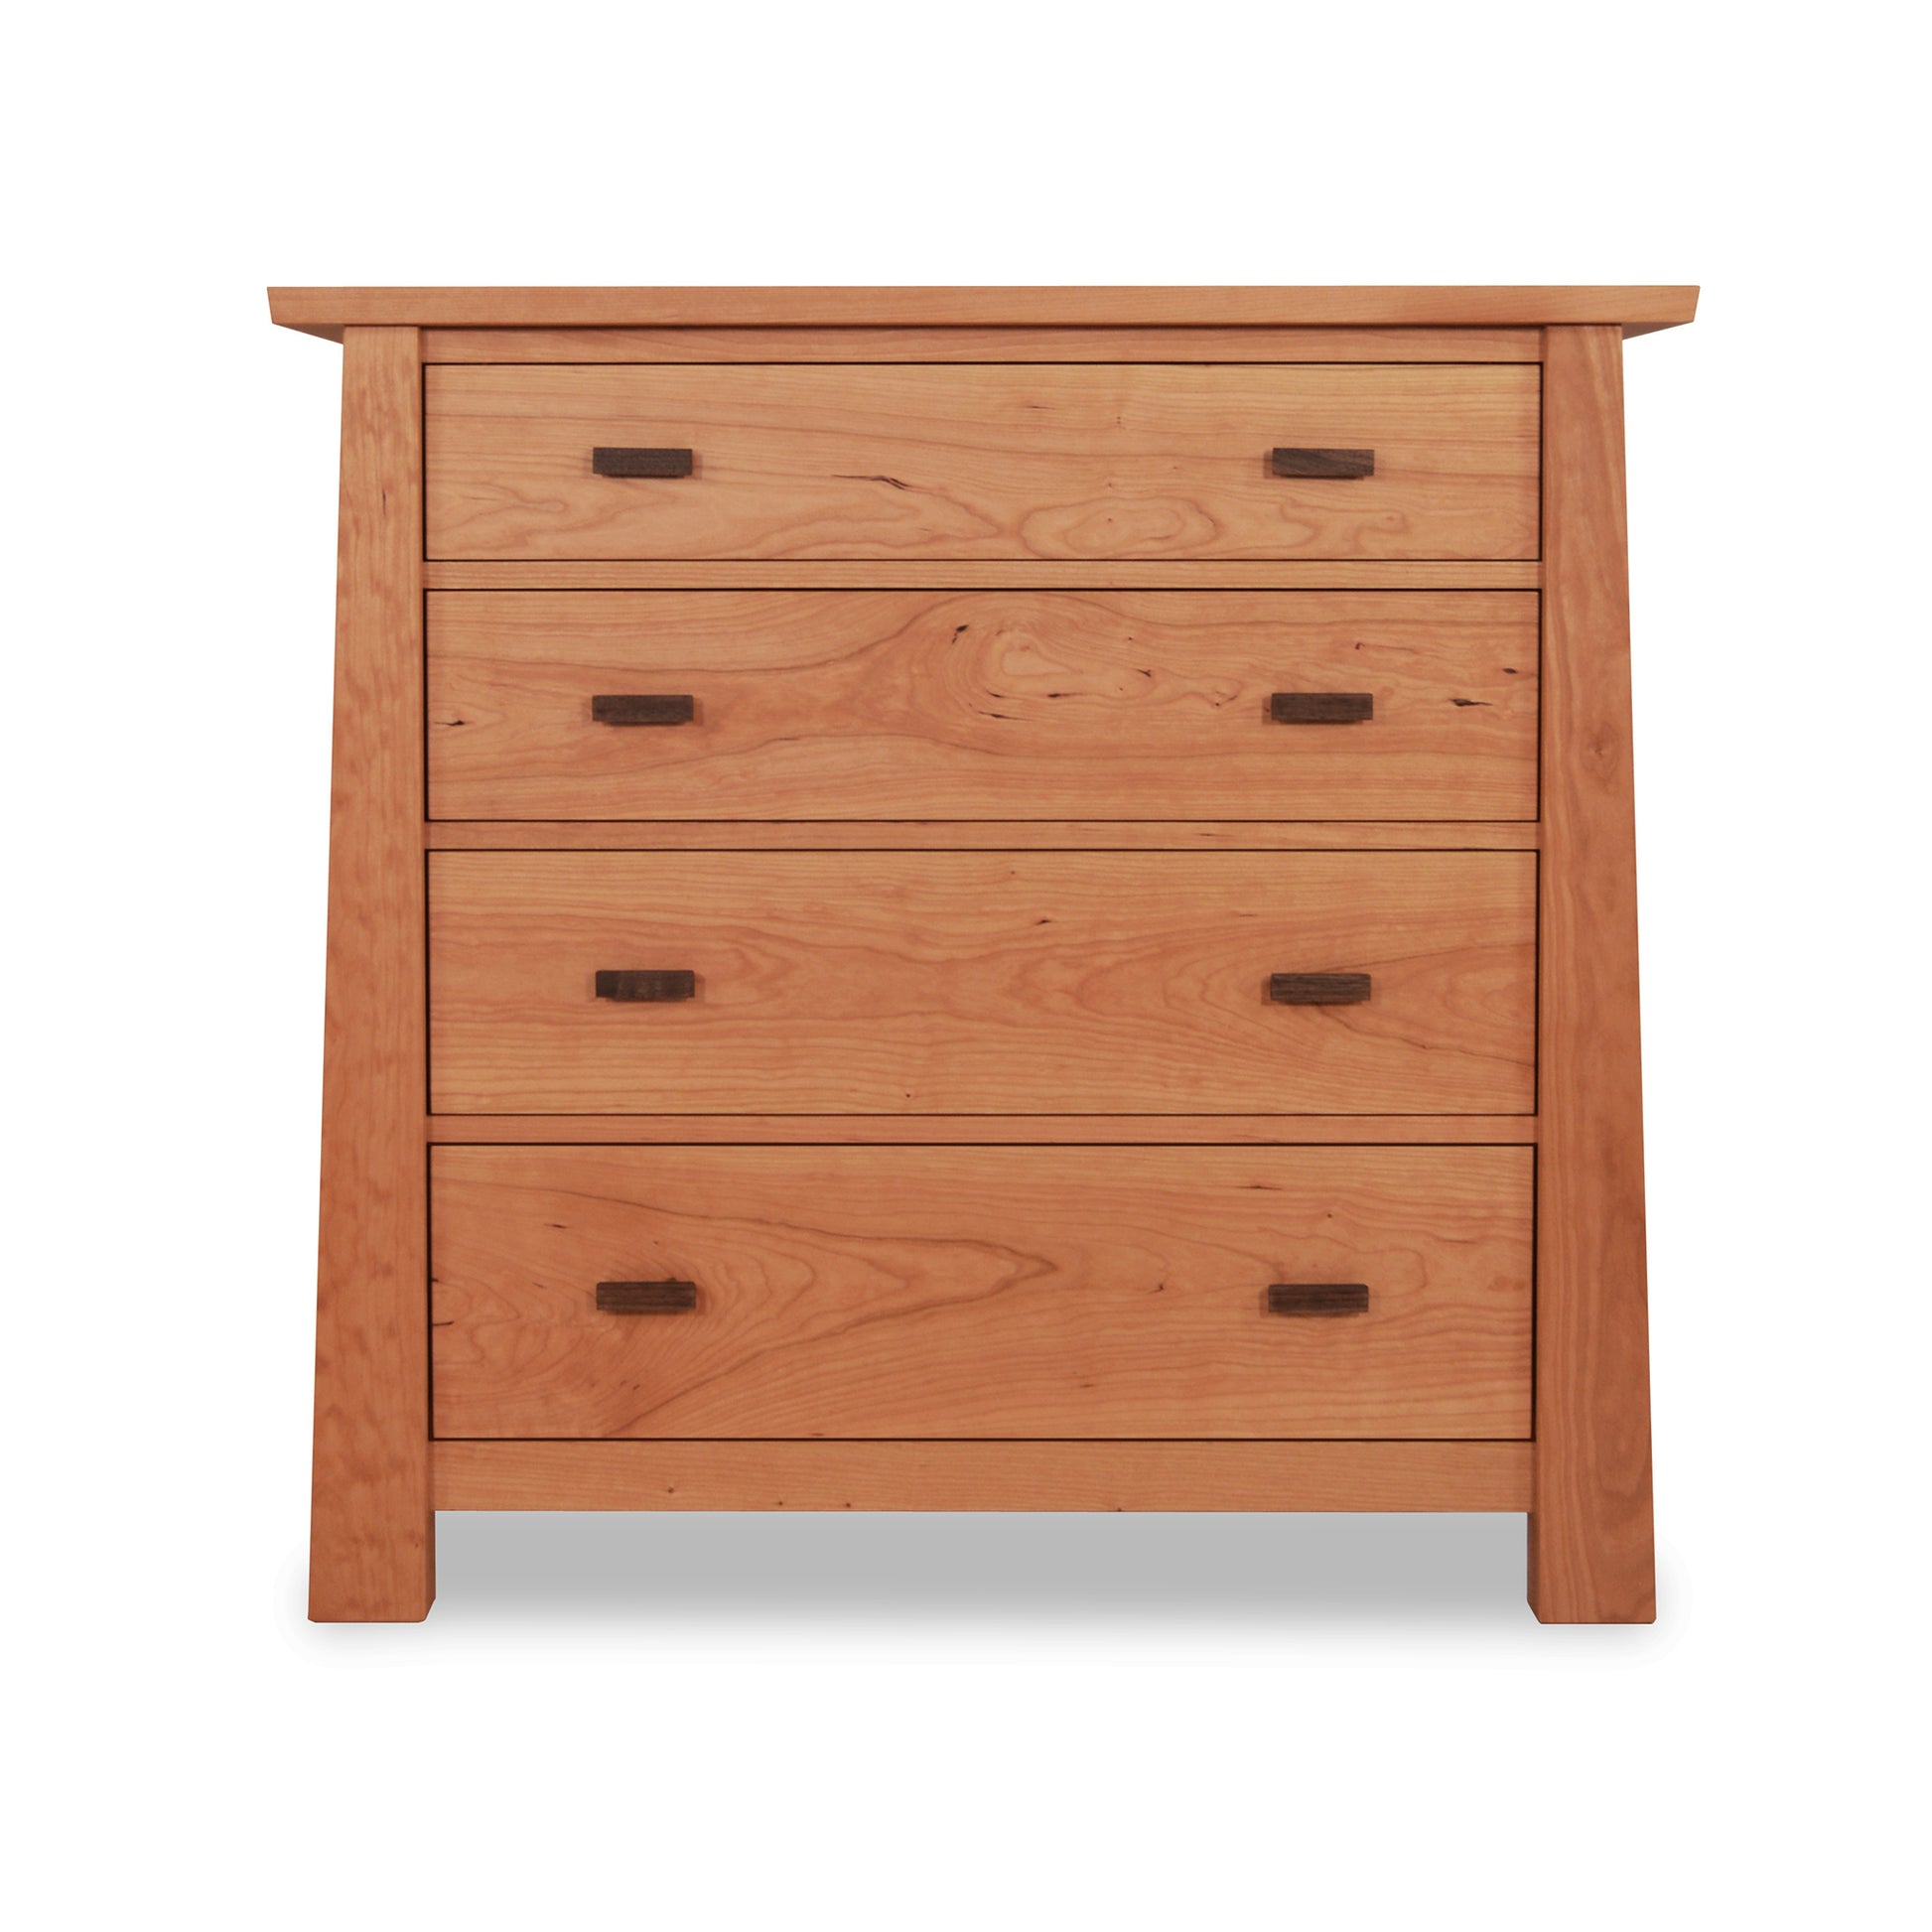 A Gamble 4-Drawer Chest by Maple Corner Woodworks with a simple design, featuring horizontal pull handles on each drawer. The dresser is photographed against a white background.